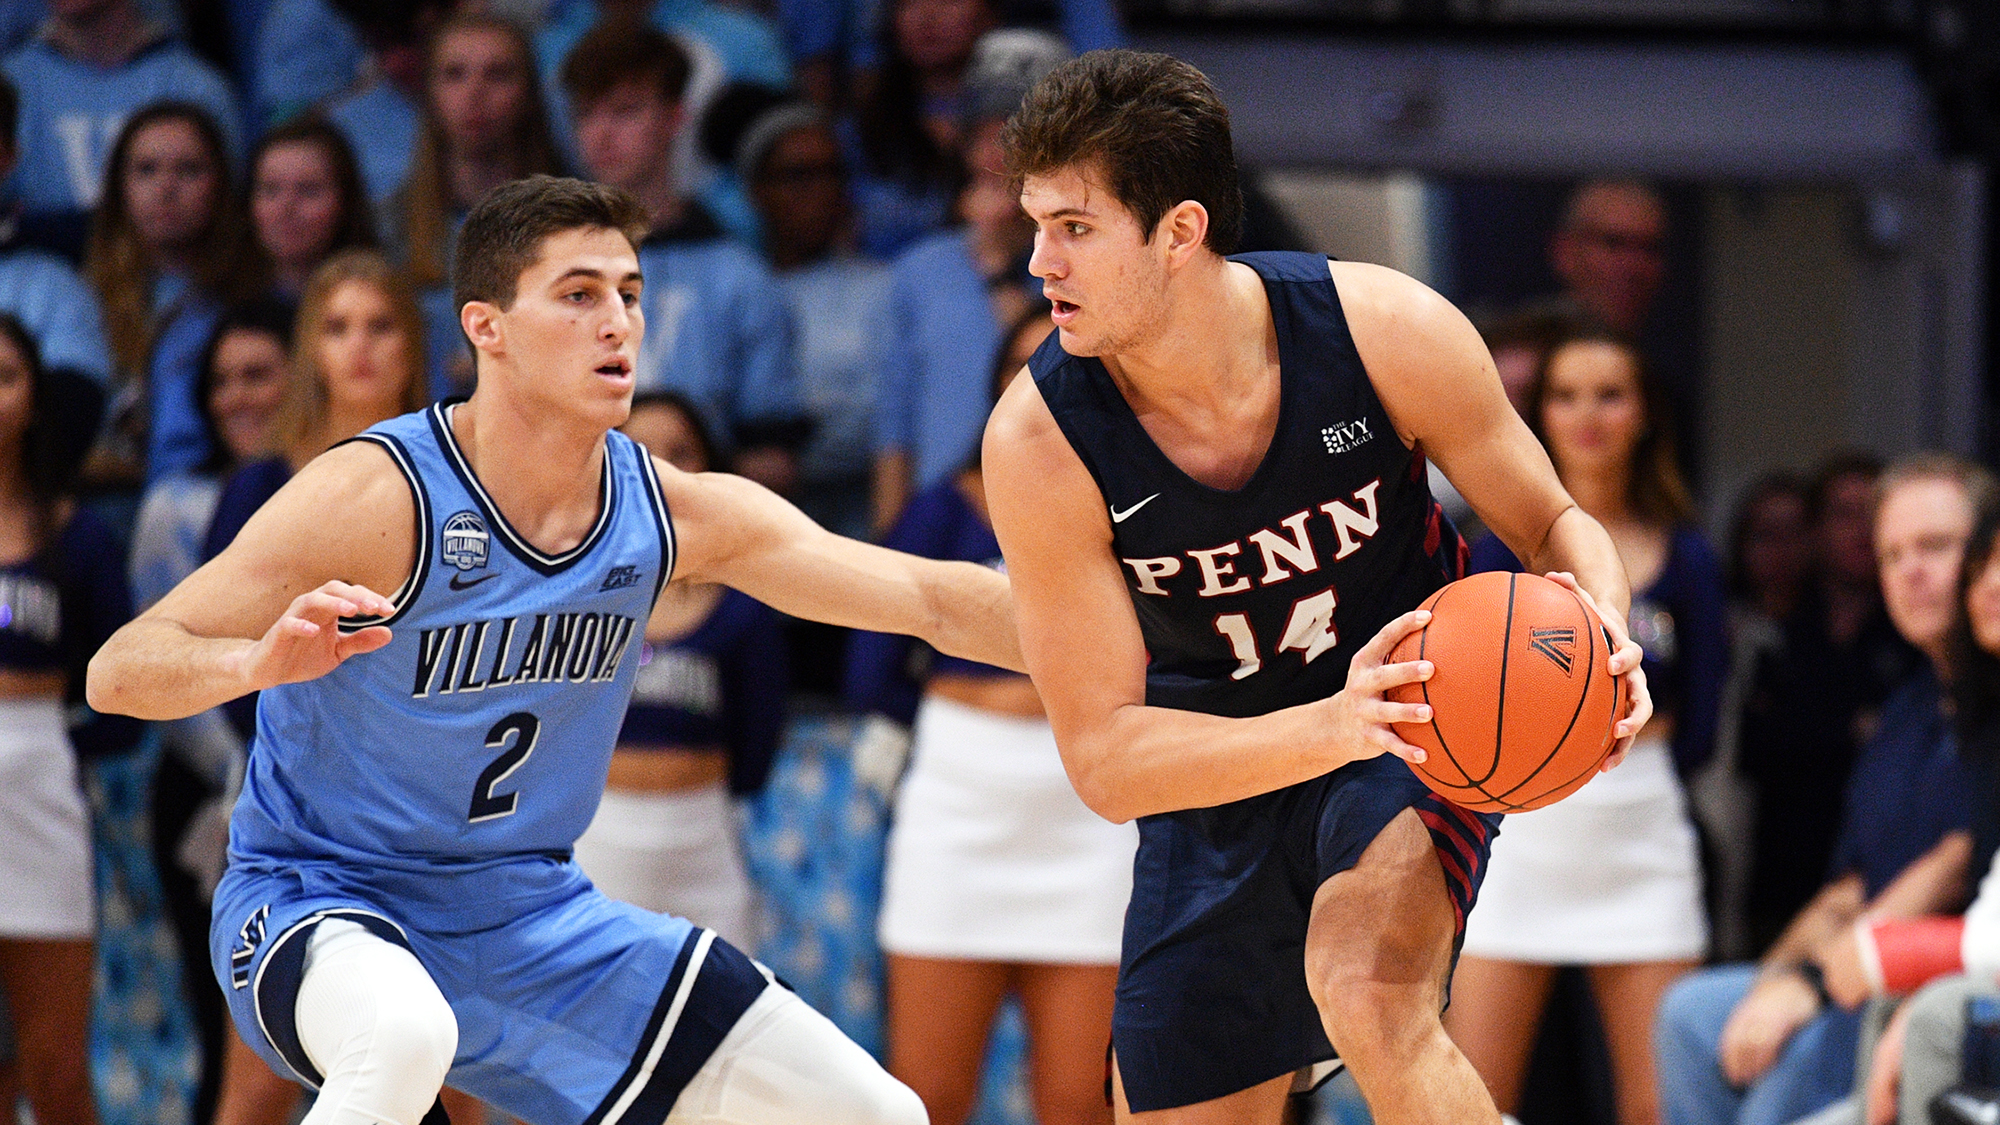 Max Martz of the men's basketball makes a move with the ball while being guarded by a defender during an away game at Villanova.